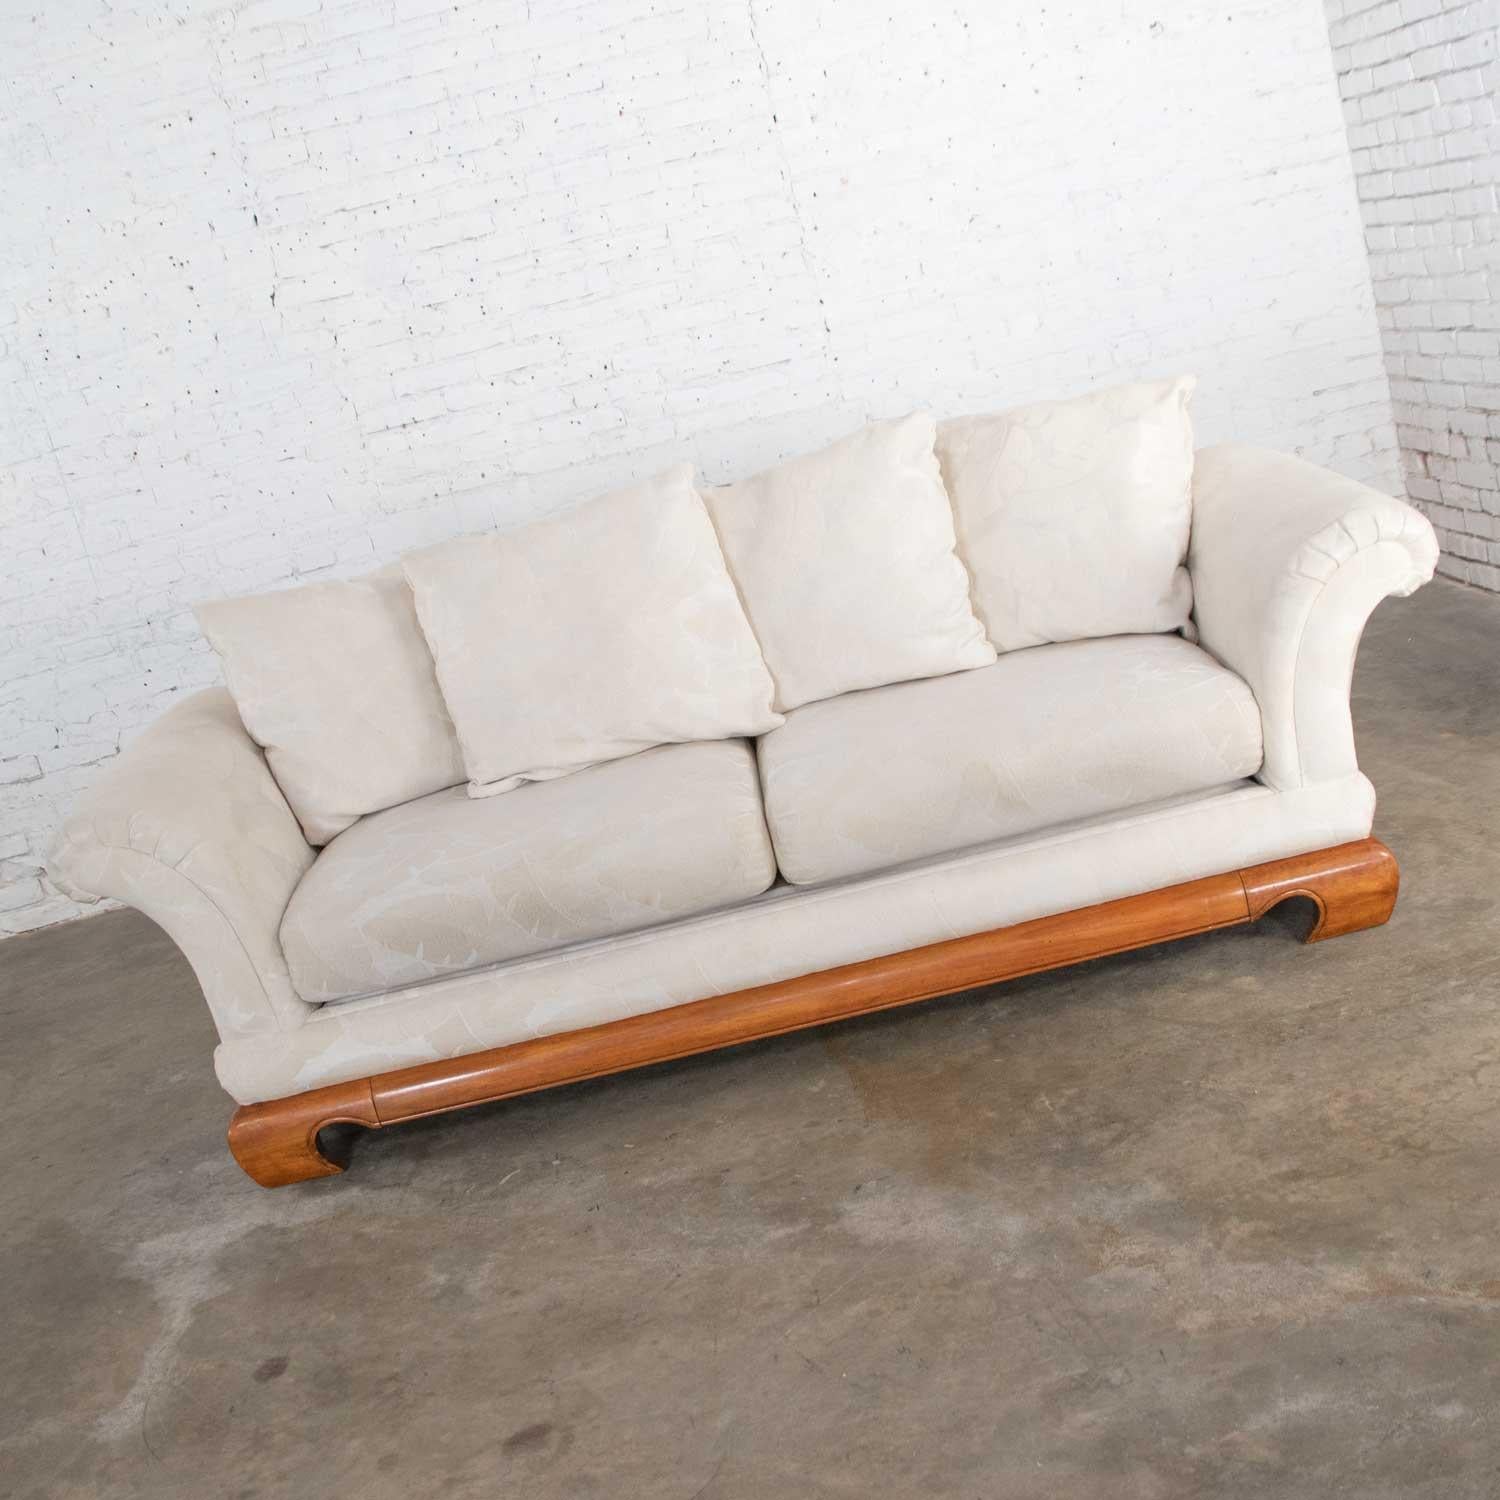 Chinoiserie Chow Leg Ming Style Sofa by Schnadig International Furniture 1